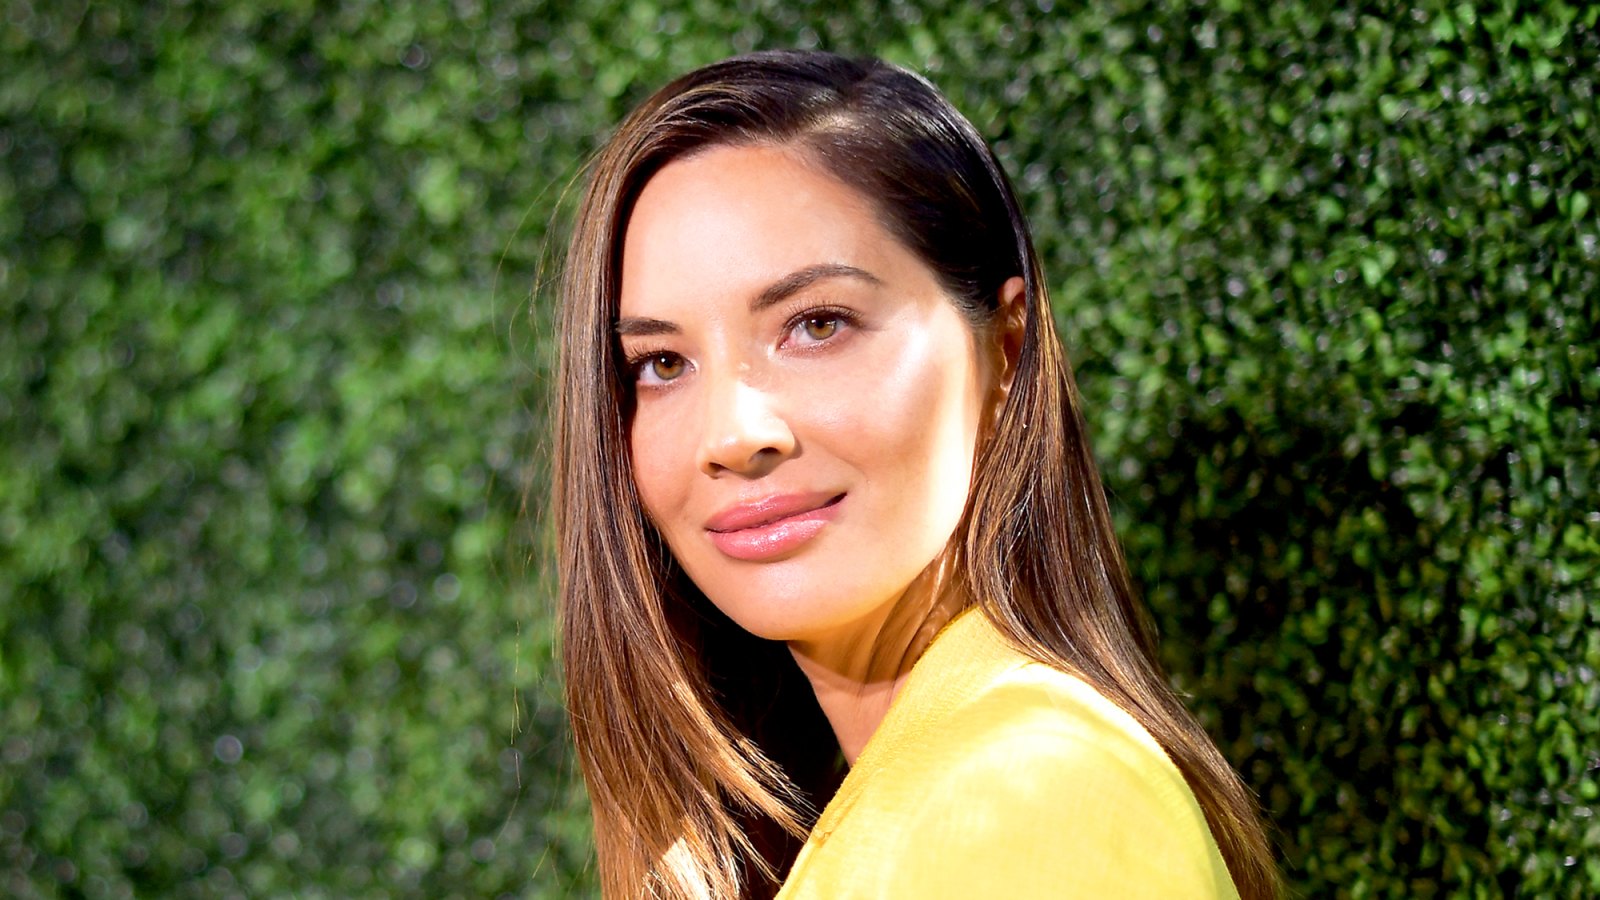 Olivia Munn attends the Runway To Red Carpet, hosted by Council of Fashion Designers of America, Variety and WWD at Chateau Marmont on February 20, 2018 in Los Angeles, California.